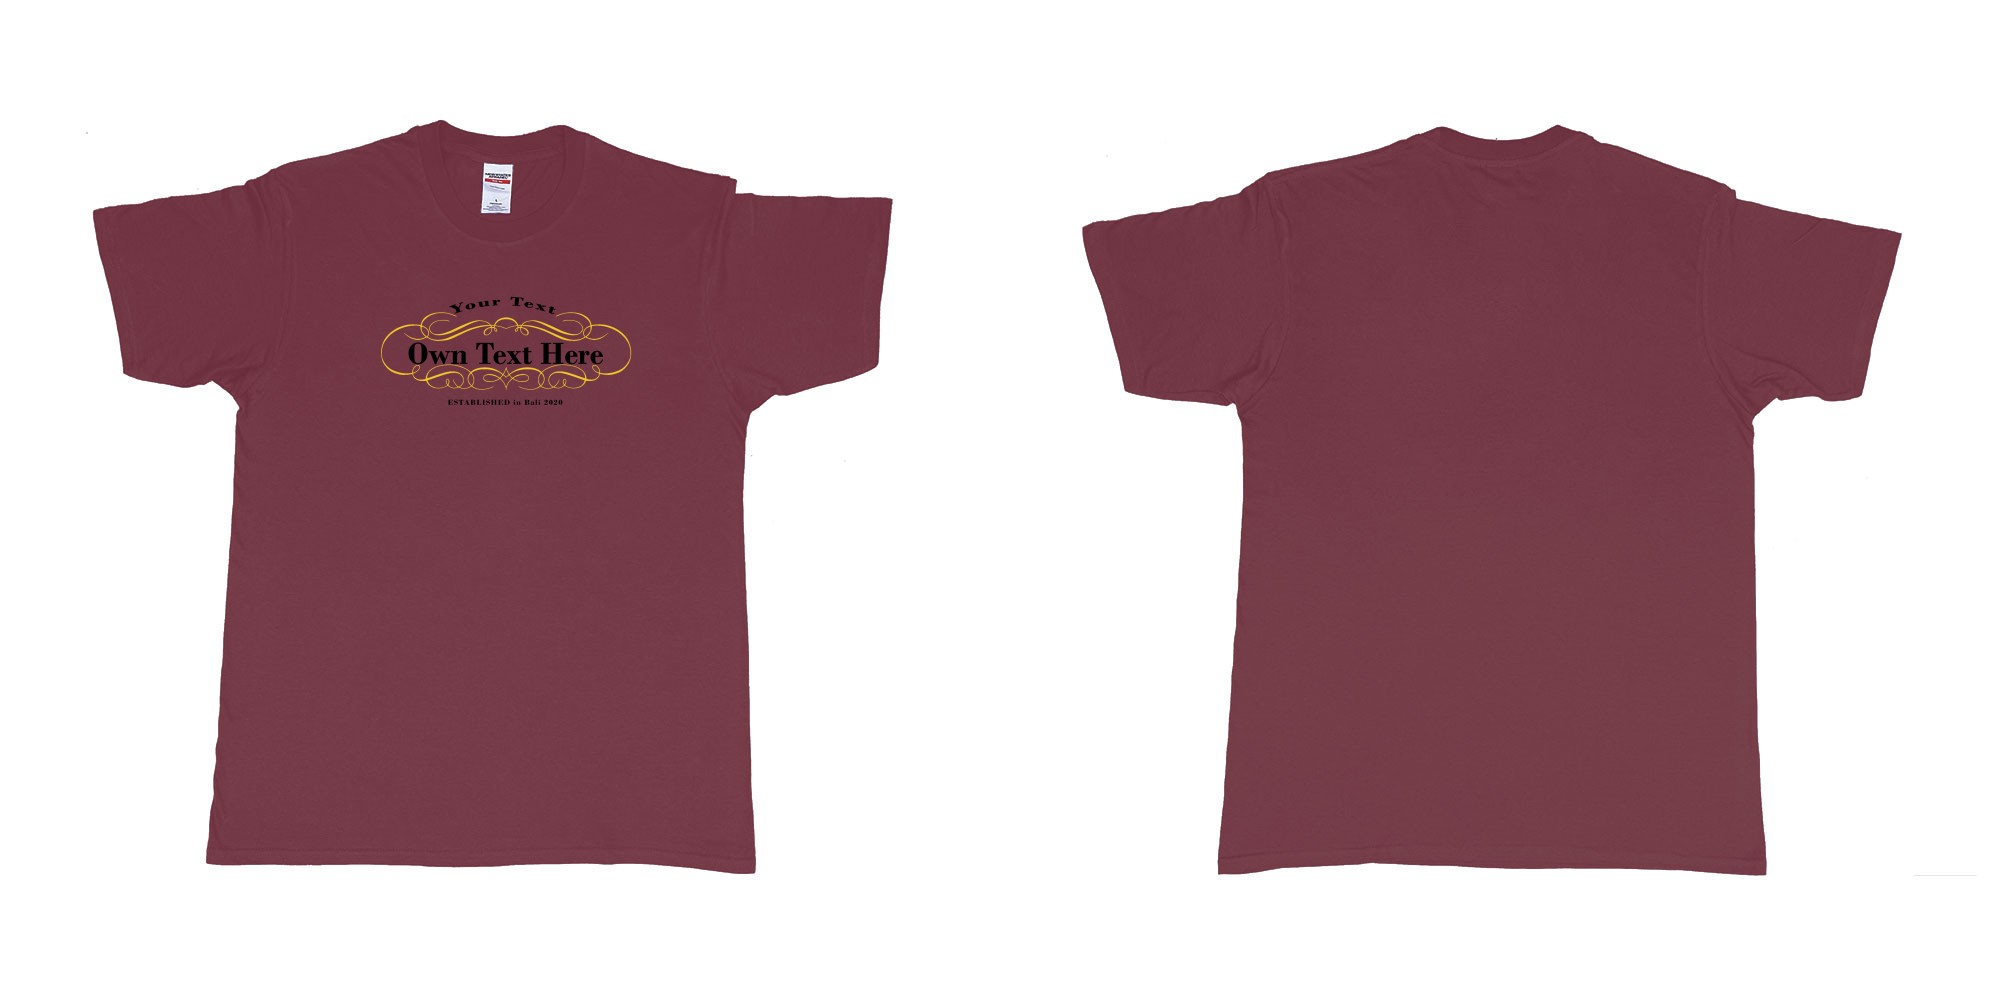 Custom tshirt design Laurent perrier in fabric color marron choice your own text made in Bali by The Pirate Way